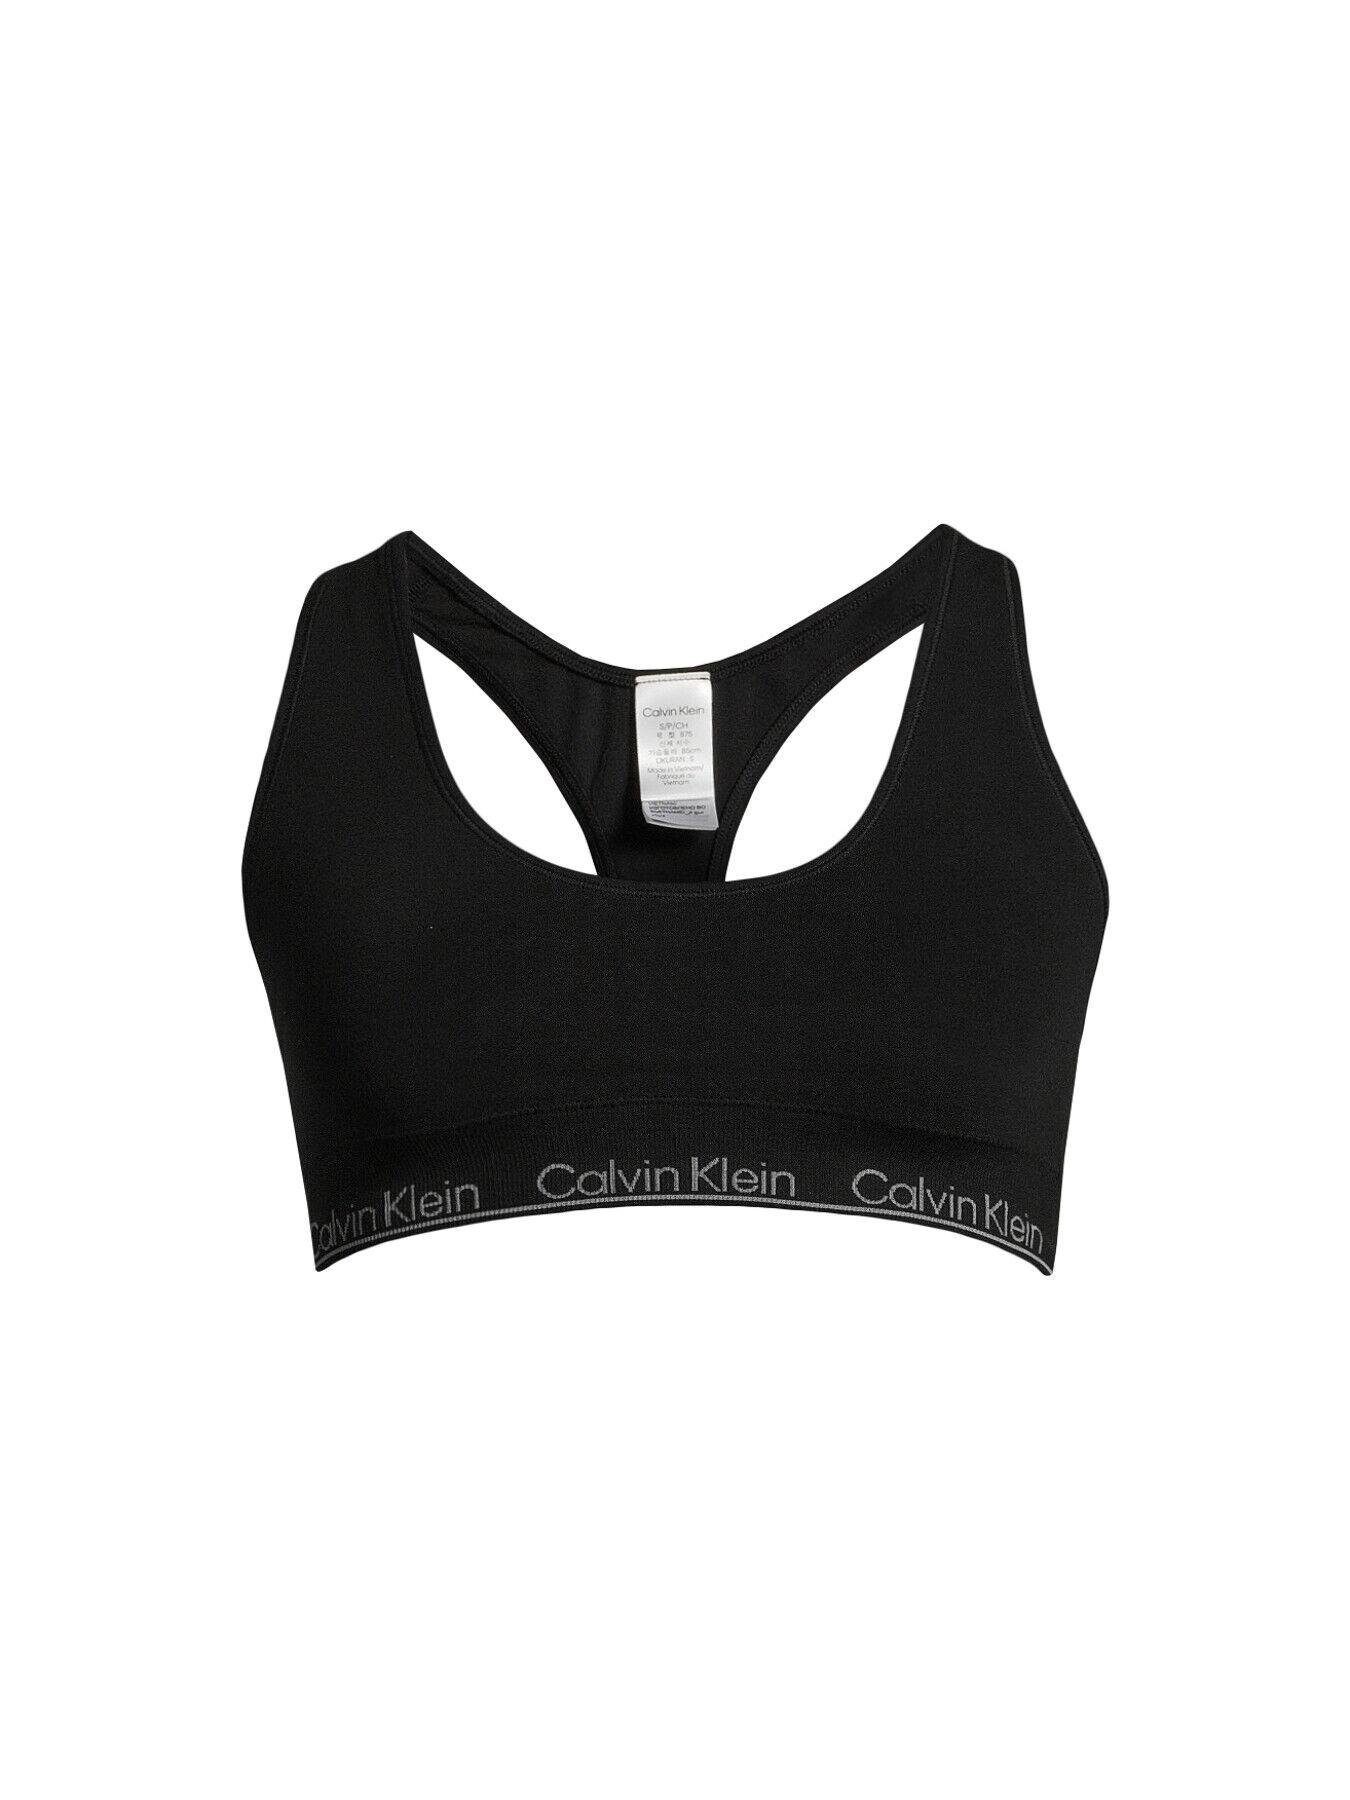 CALVIN KLEIN Modern Cotton Seamless Lightly Lined Triangle Bra in